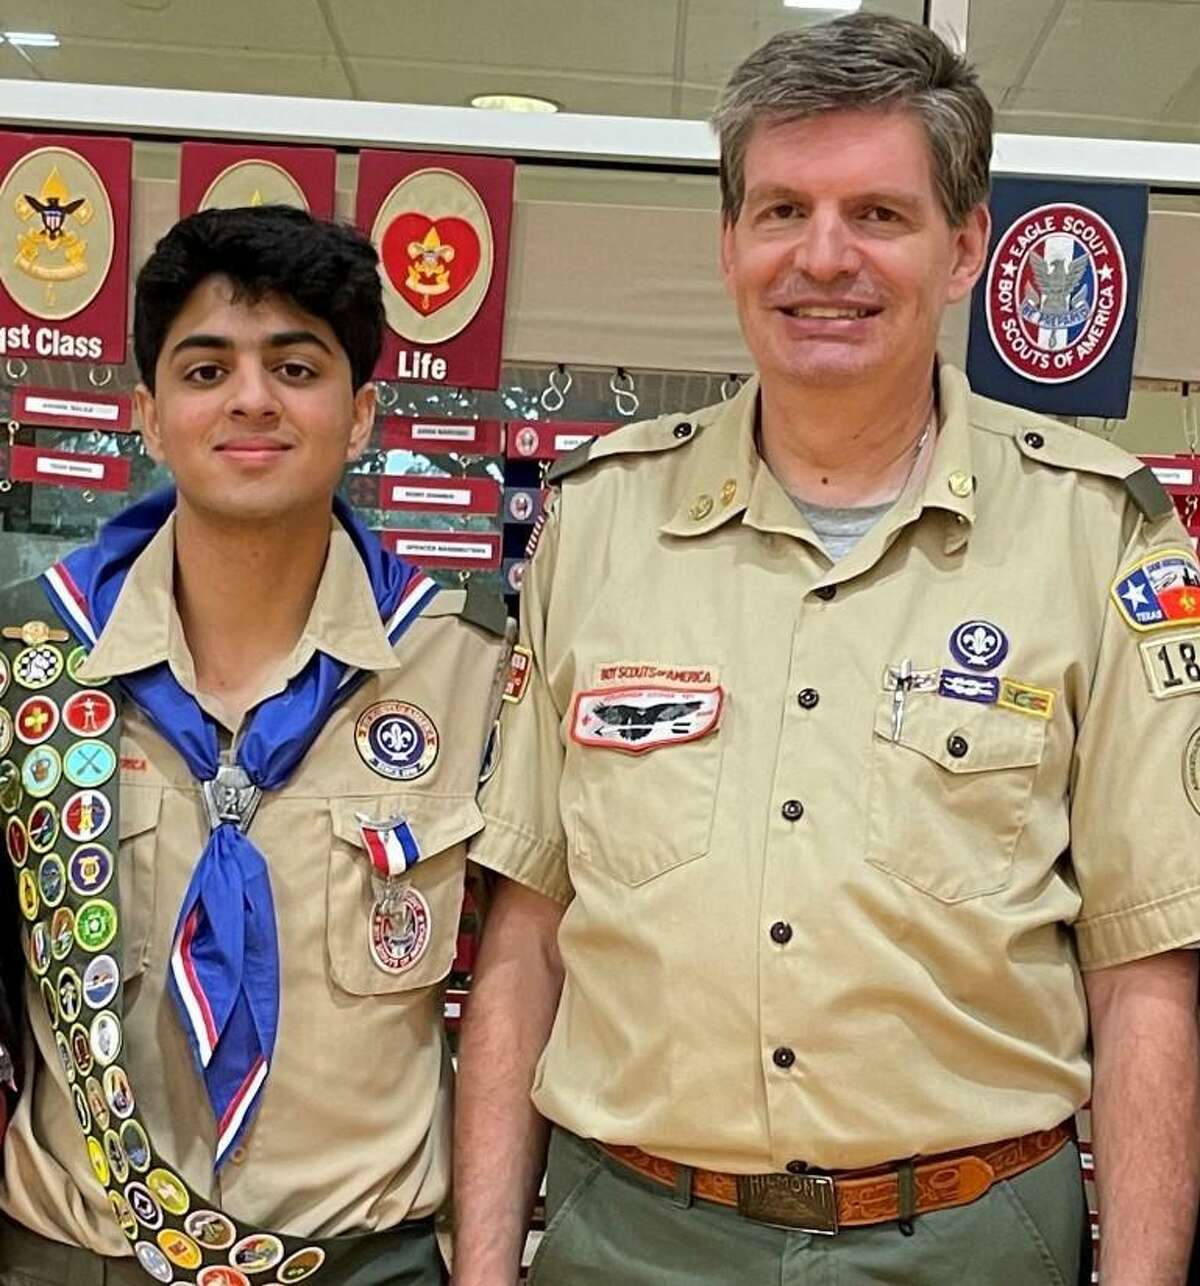 Sugar Land’s Rahul Robin Subramaniam from Troop 1845 received his Eagle Award at a Boy Scout Court of Honor held on Monday, May 16.